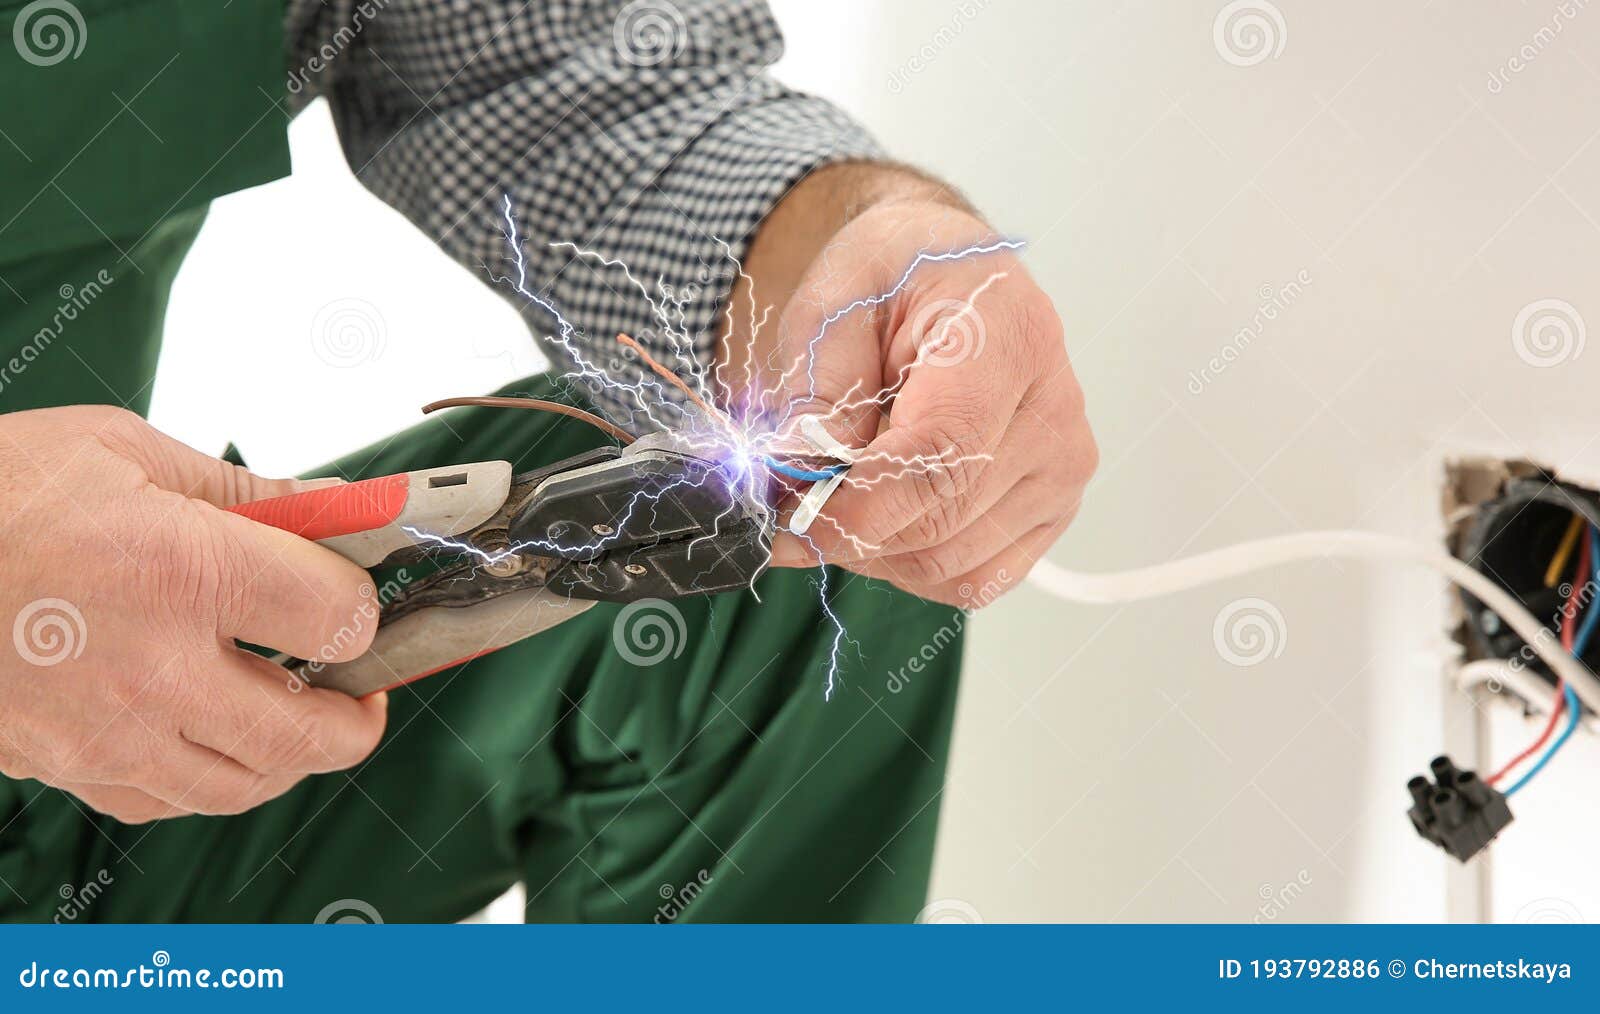 electrician receiving electric shock while working